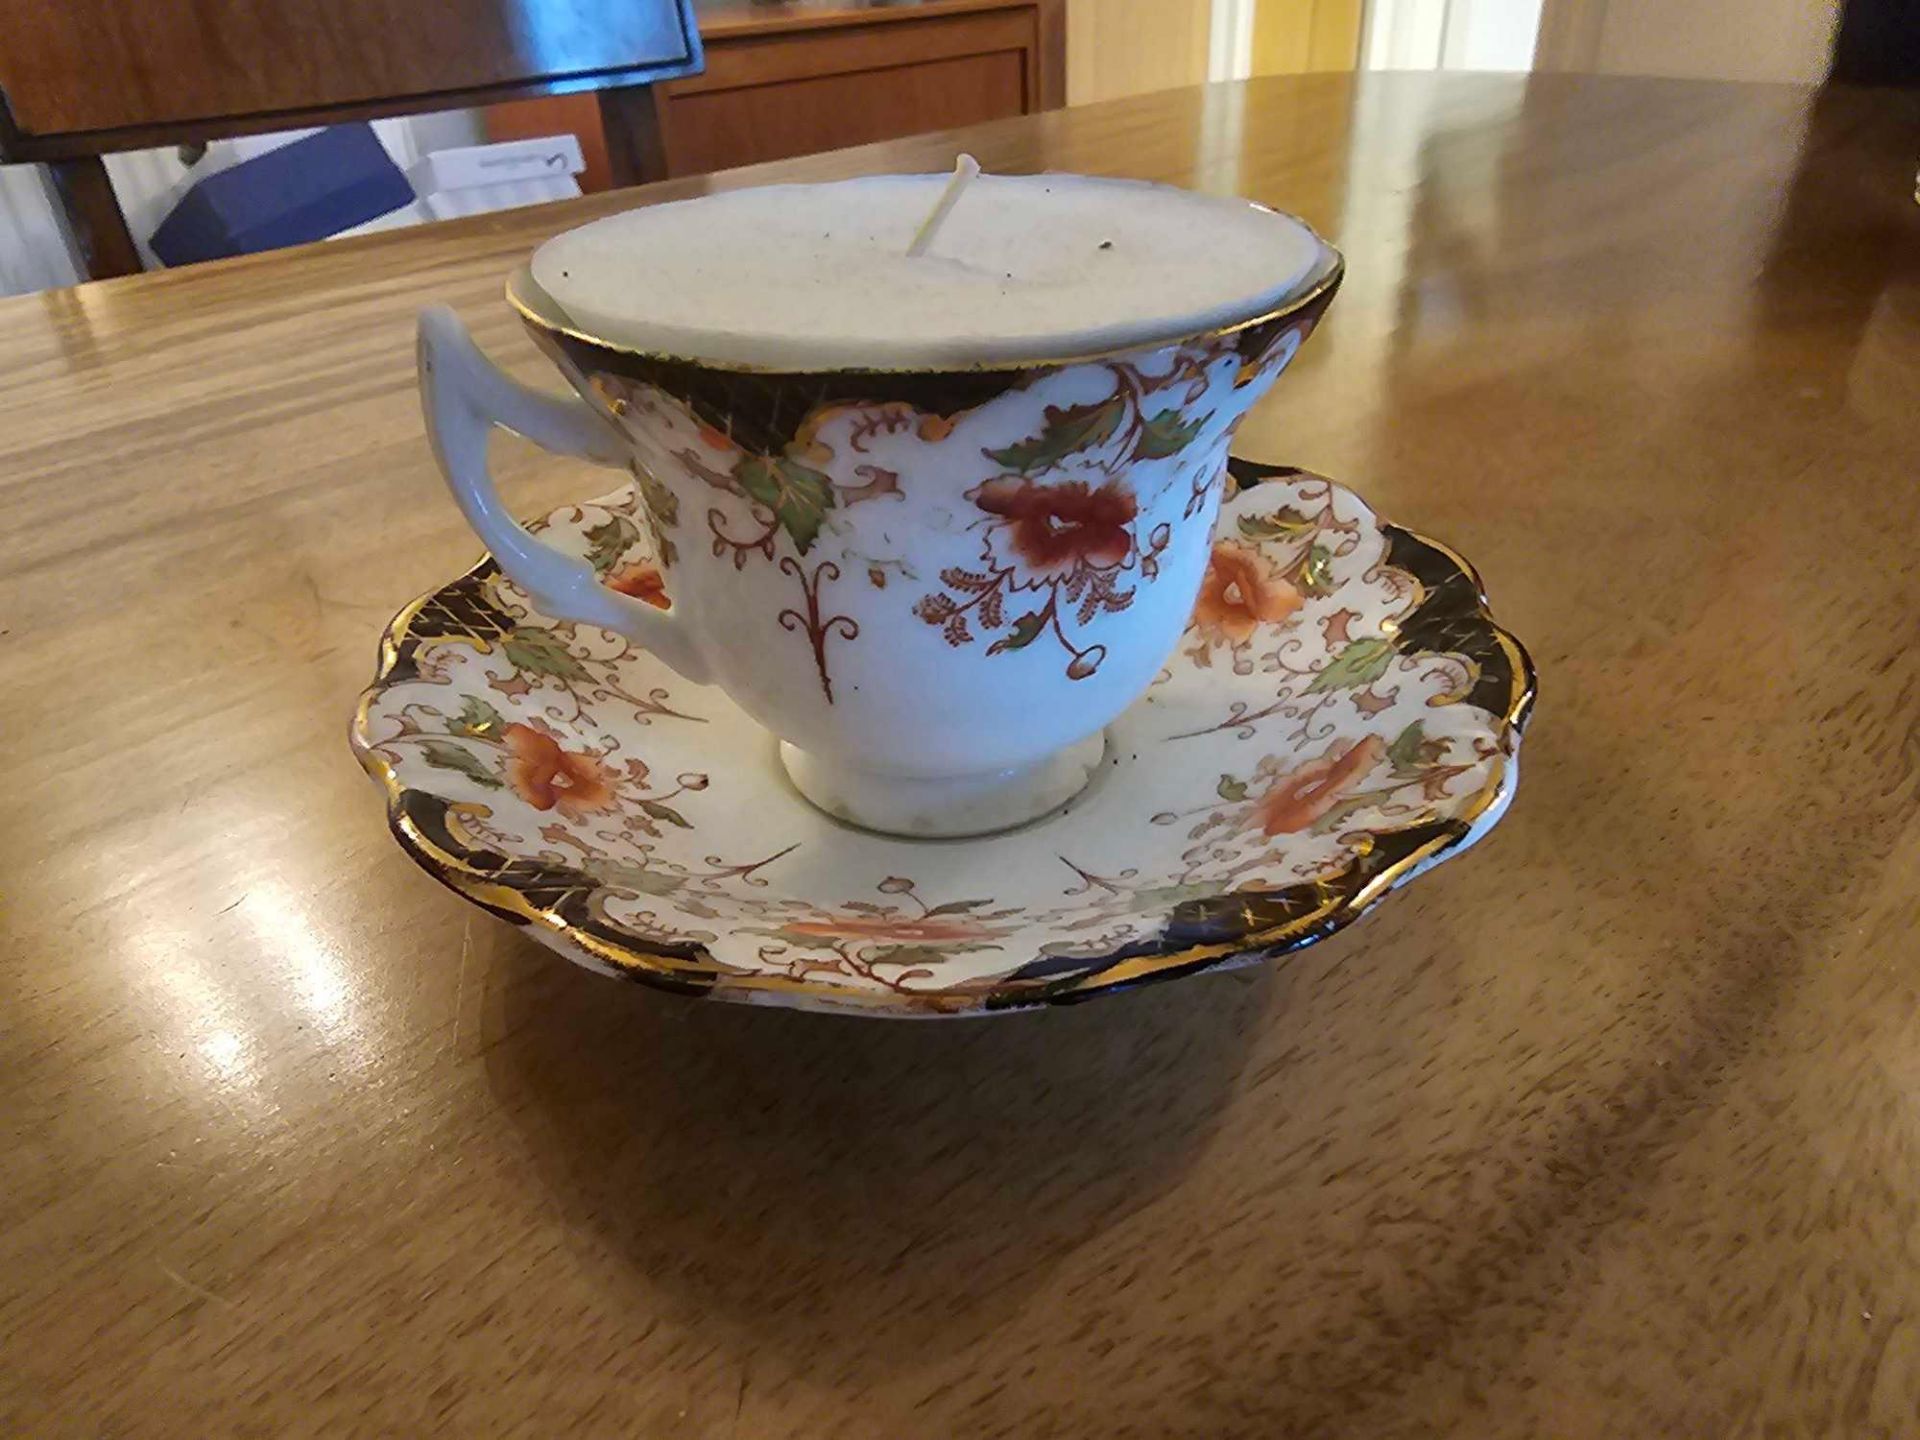 A Alton Wellington China JHC & Co Longton England Cup And Saucer With Wax Candle Inset - Image 2 of 3